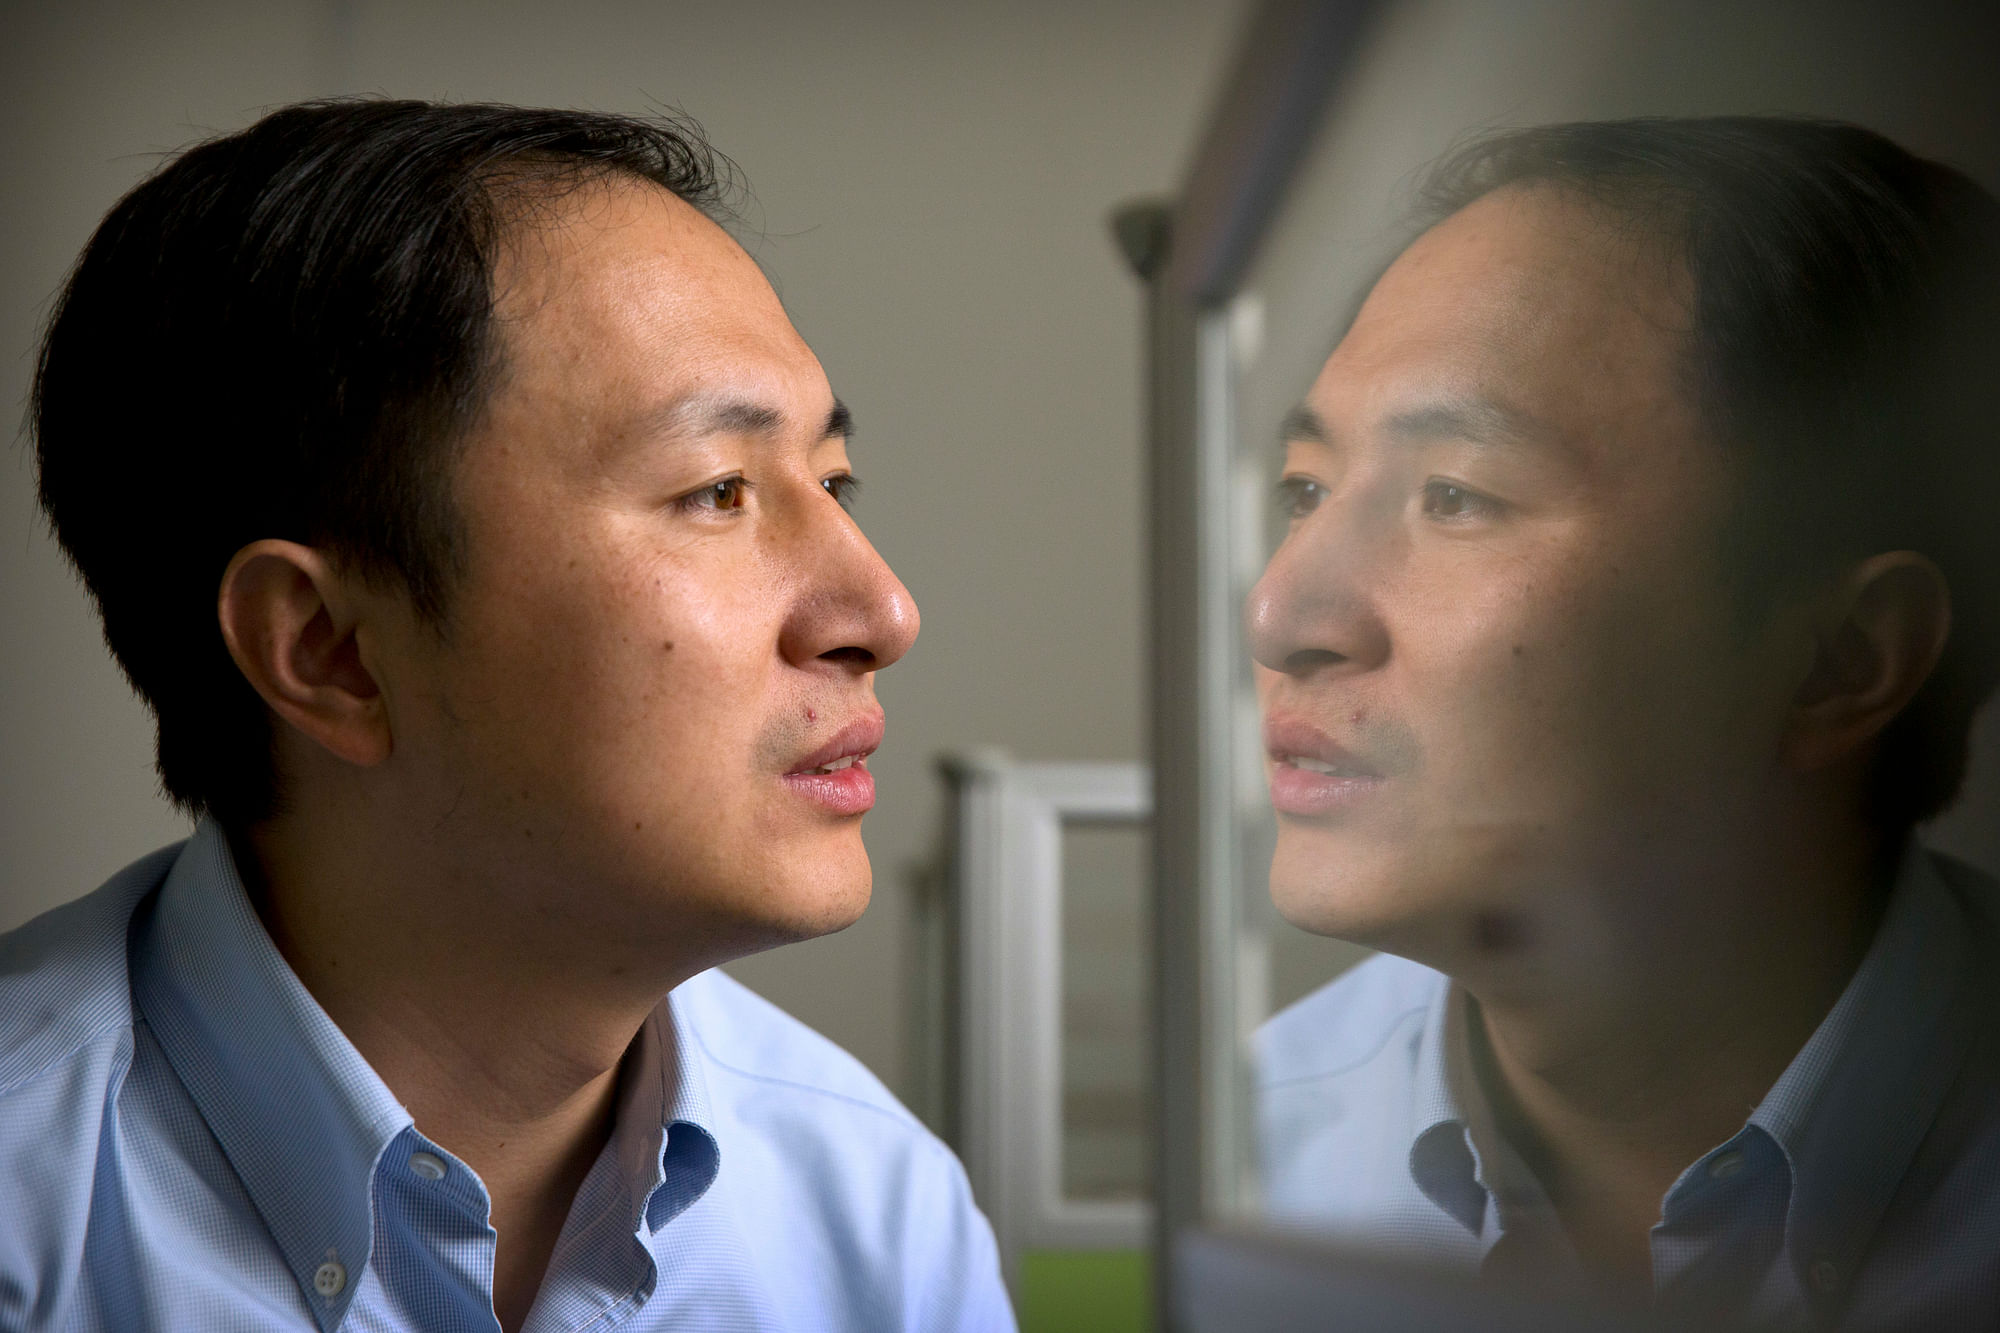 Chinese scientist he claims he helped make world’s first genetically edited babies: twin girls whose DNA he said he altered. 